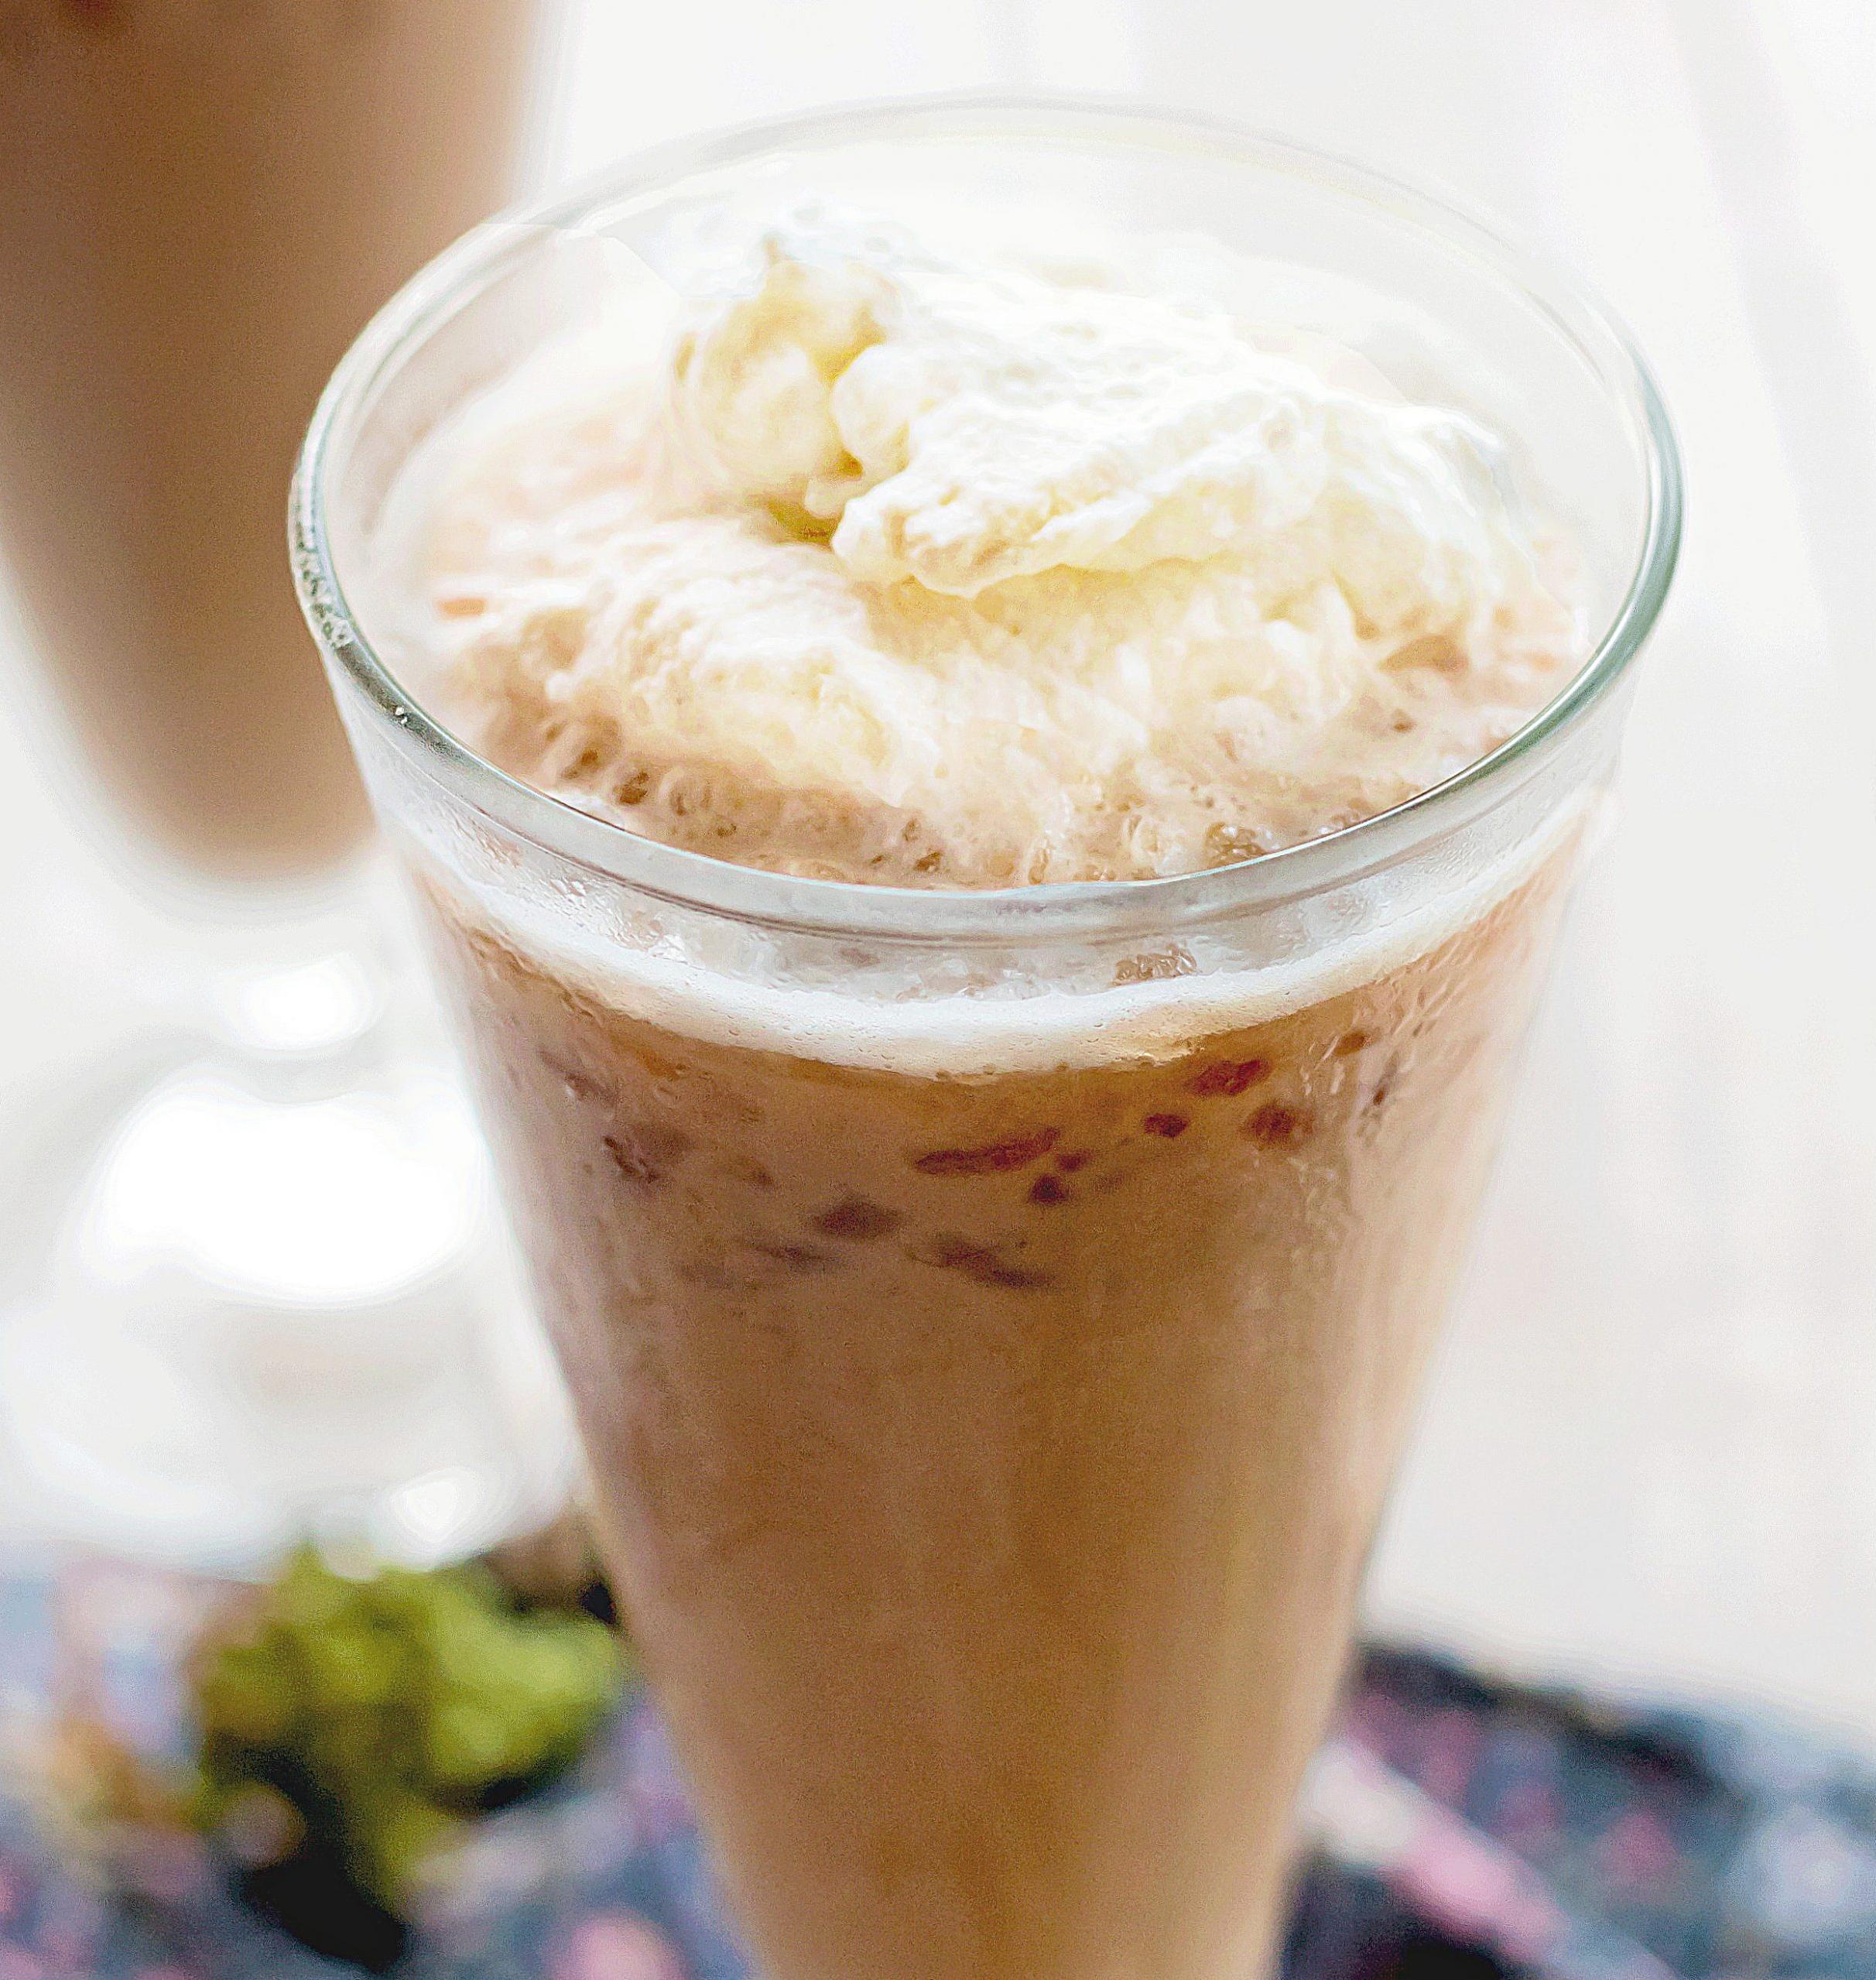  Refreshing and nutty, this iced hazelnut coffee cooler is perfect for summer days.